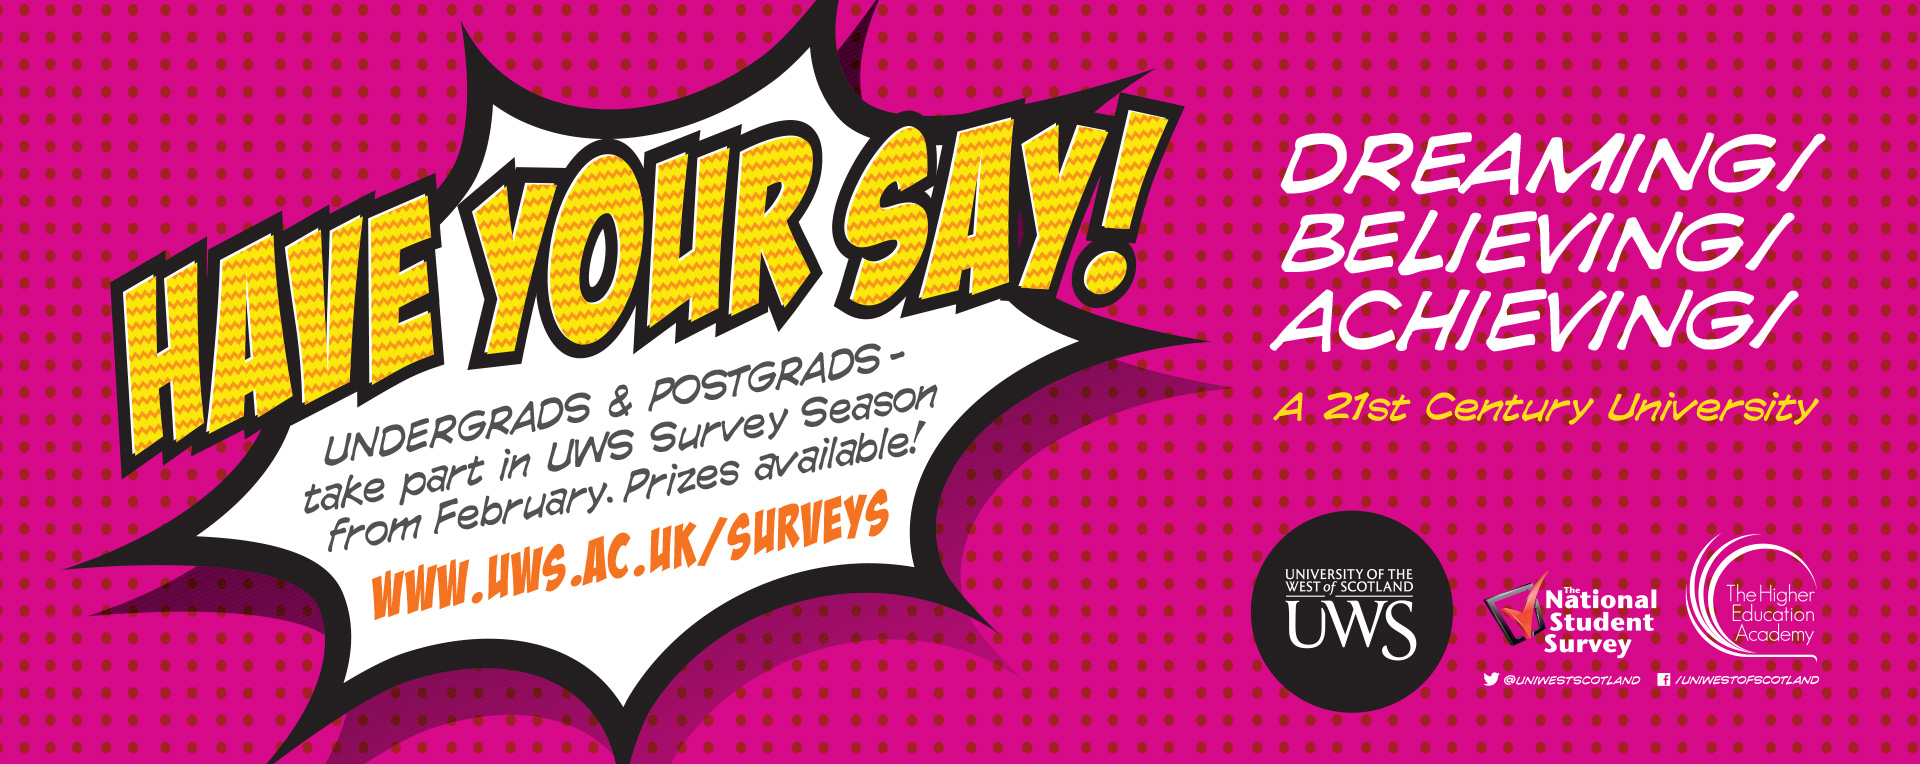 UWS Have Your Say Advertising Campaign